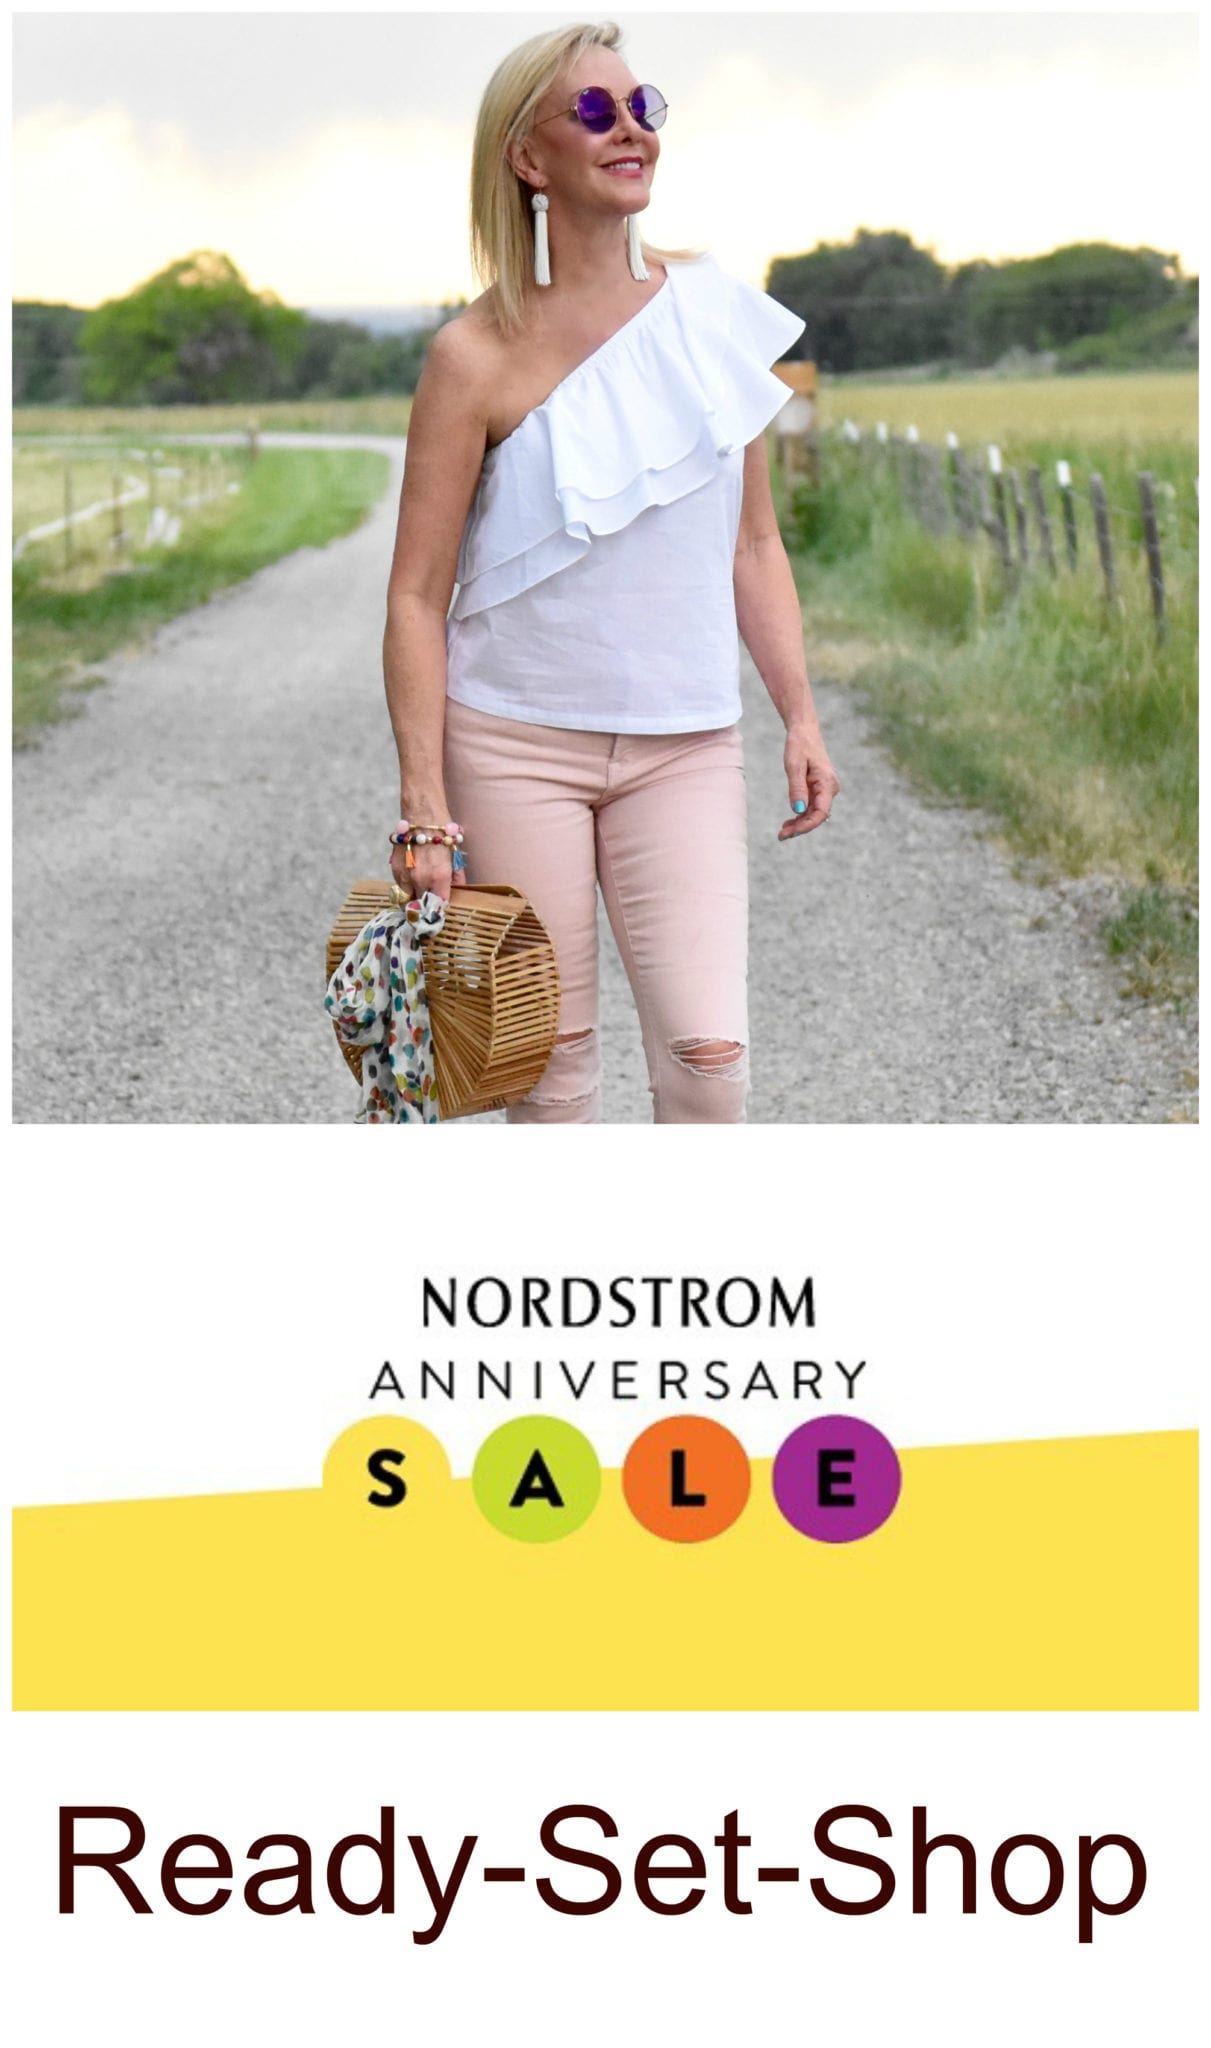 How To Shop Nordstrom Anniversary Sale 2017 | SheShe&#39;s Catalog Picks - SheShe Show by Sheree Frede